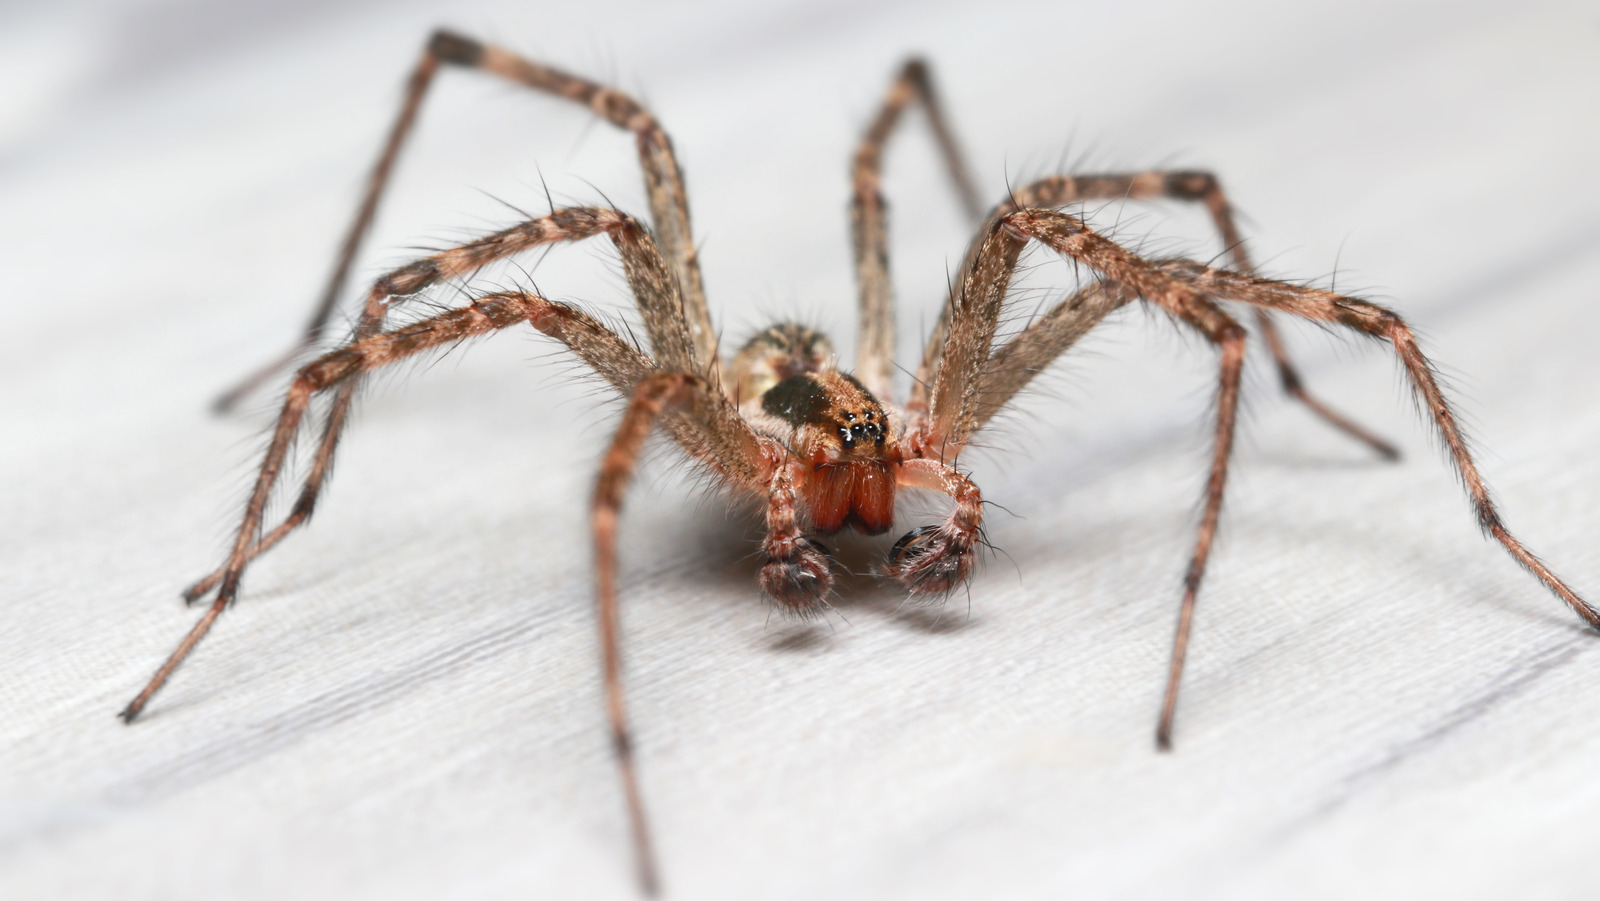 How To Get Rid Of Hobo Spiders In Your House